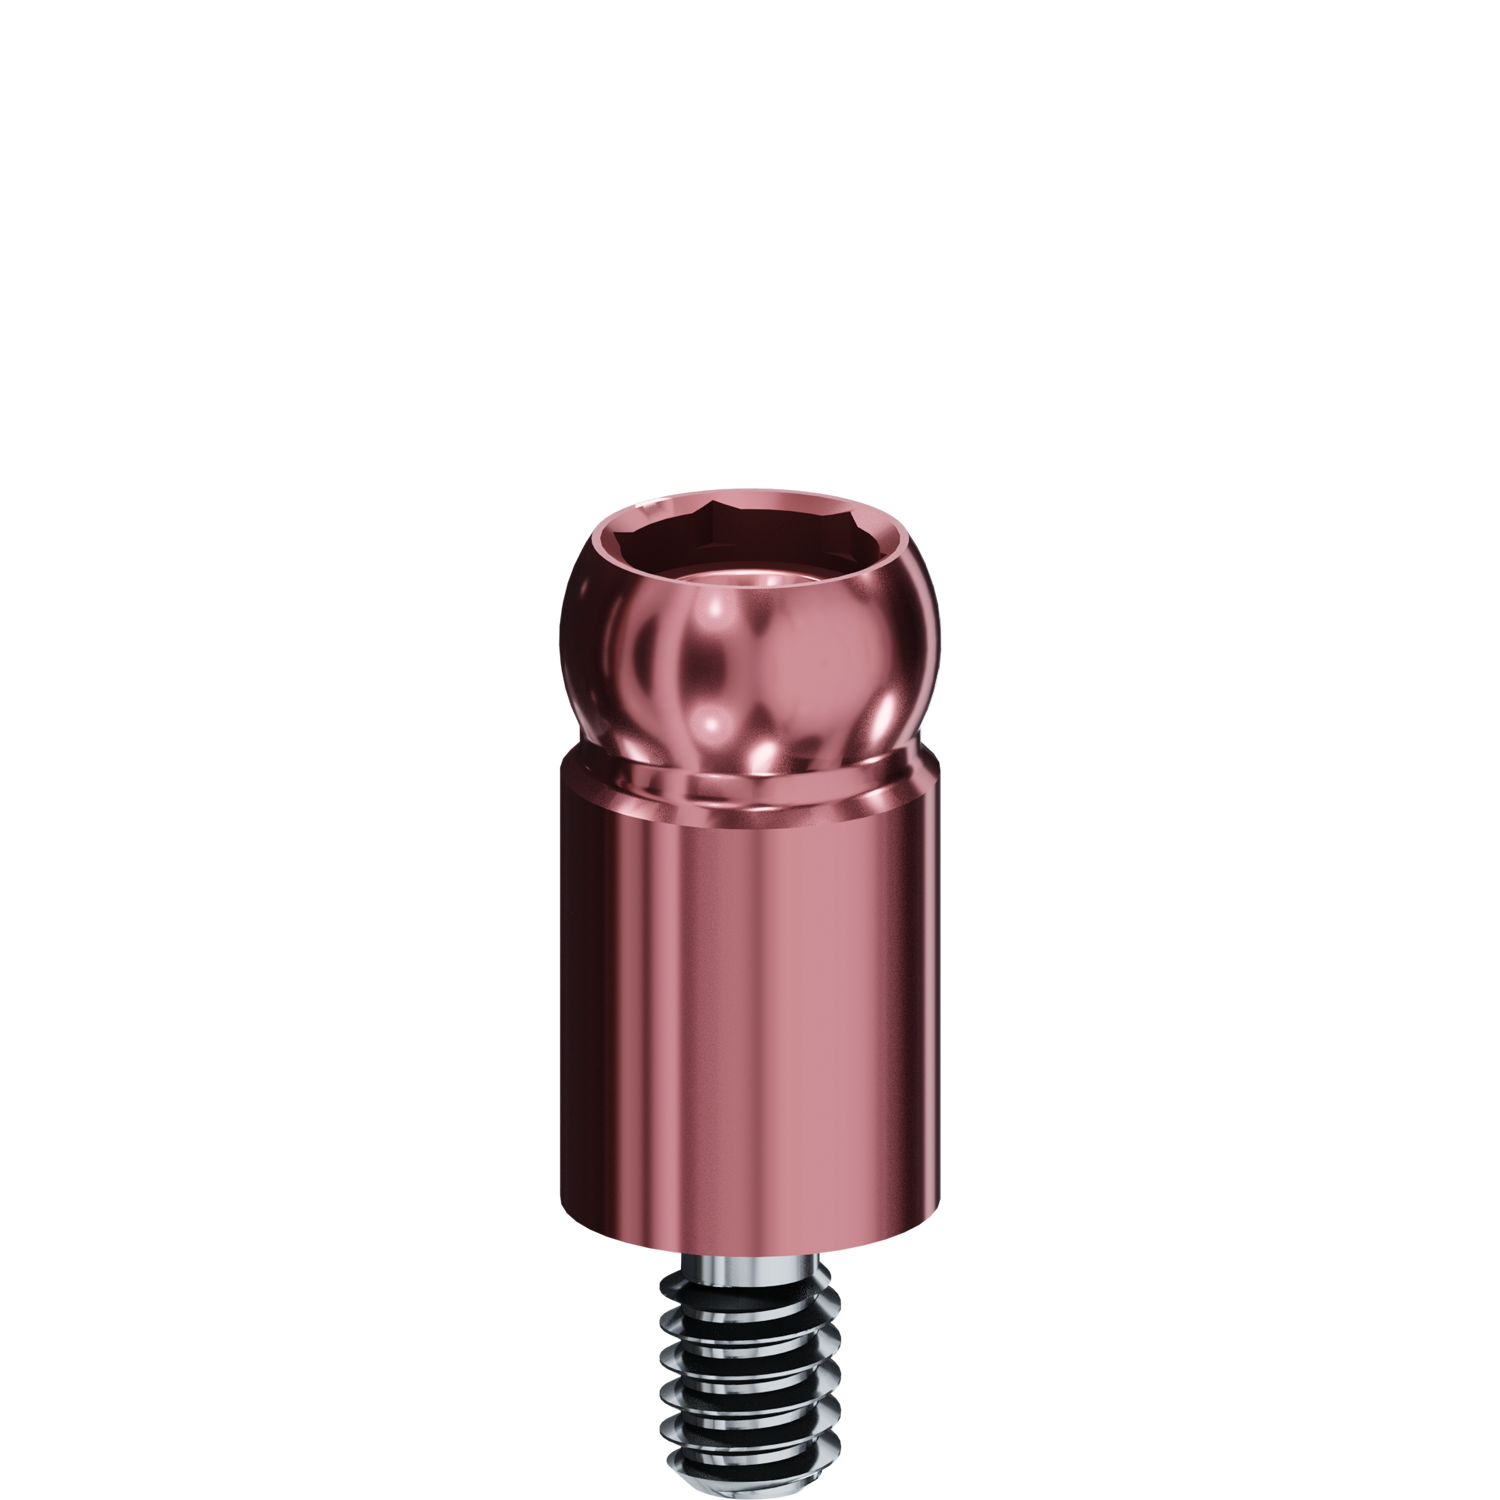 F-Tx Attachment System 4.0mm Southern Implants External Hex, 6mm Cuff